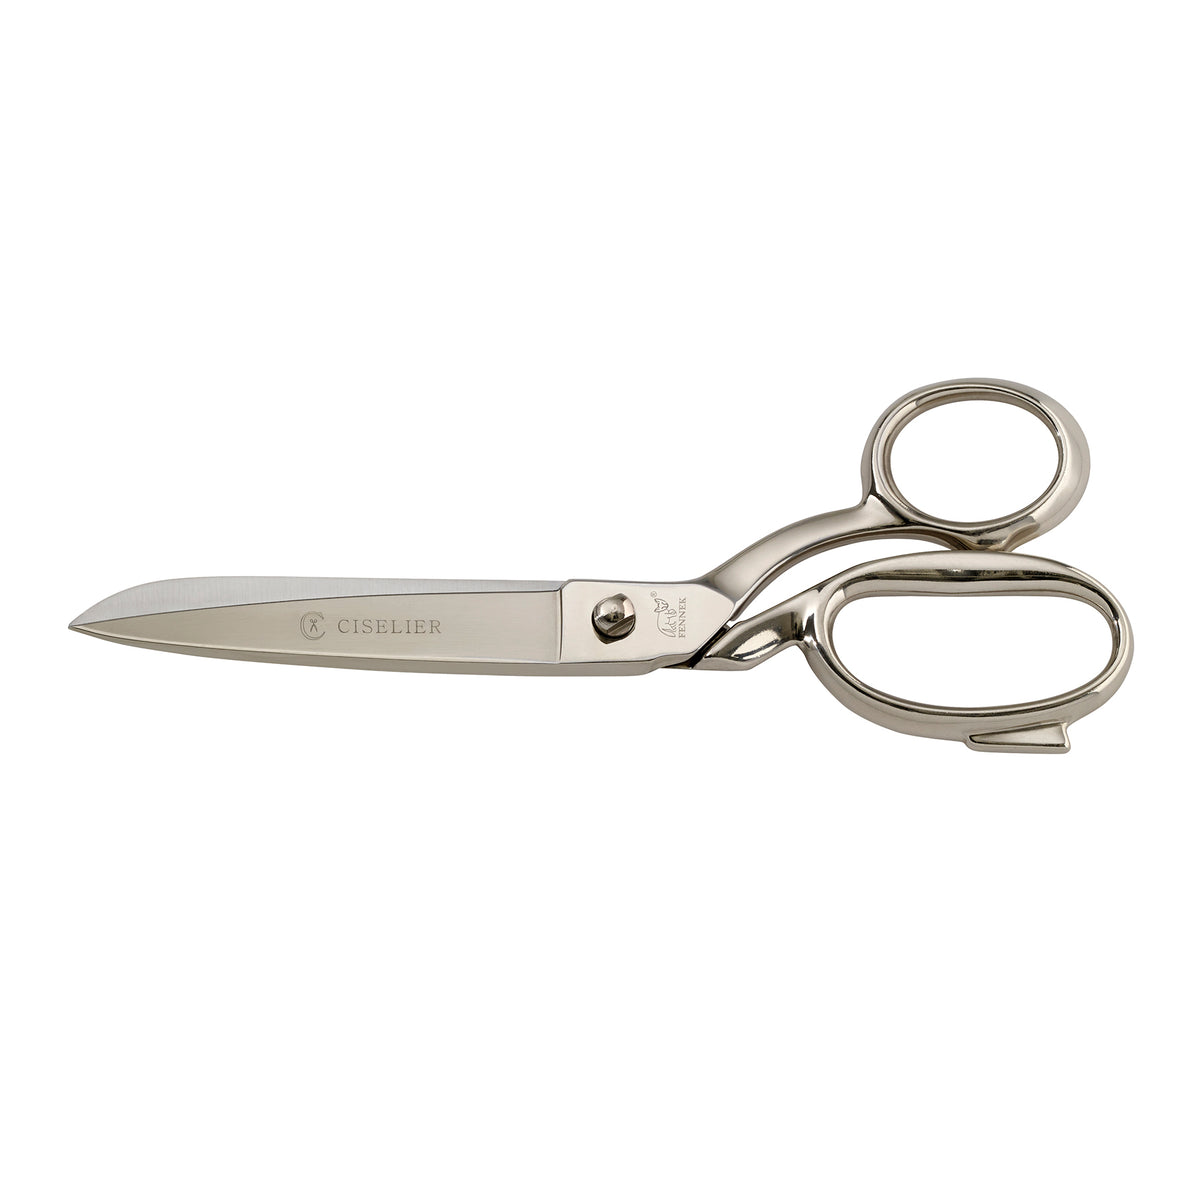 8 1/2 Inch Pinking Shears-made in Italy -  Finland